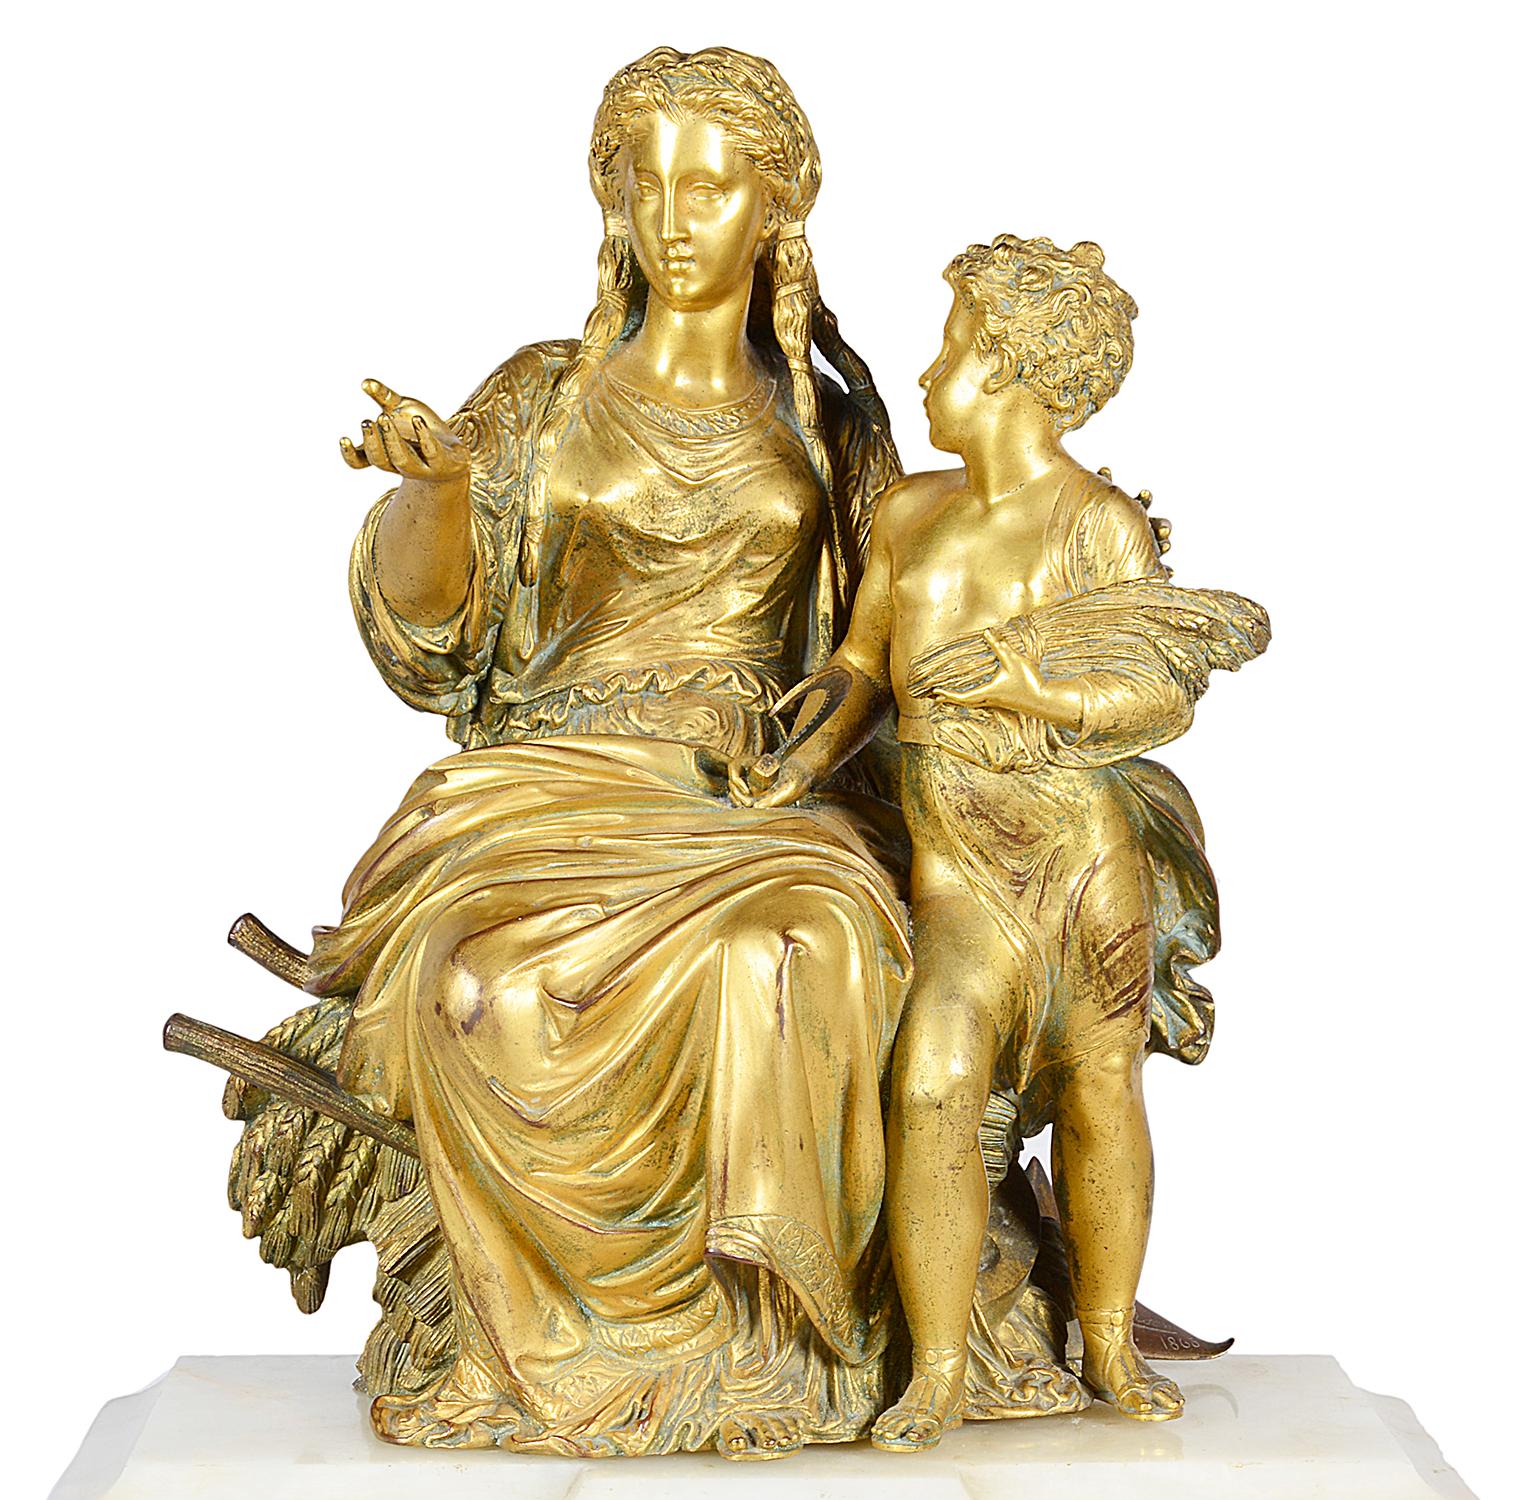 A very good quality 19th century French Louis XVI style gilded ormolu and marble mantel clock, depicting a mother and child after harvesting above an eight day duration chiming clock, either side having classical Roman bust plaques raised on a